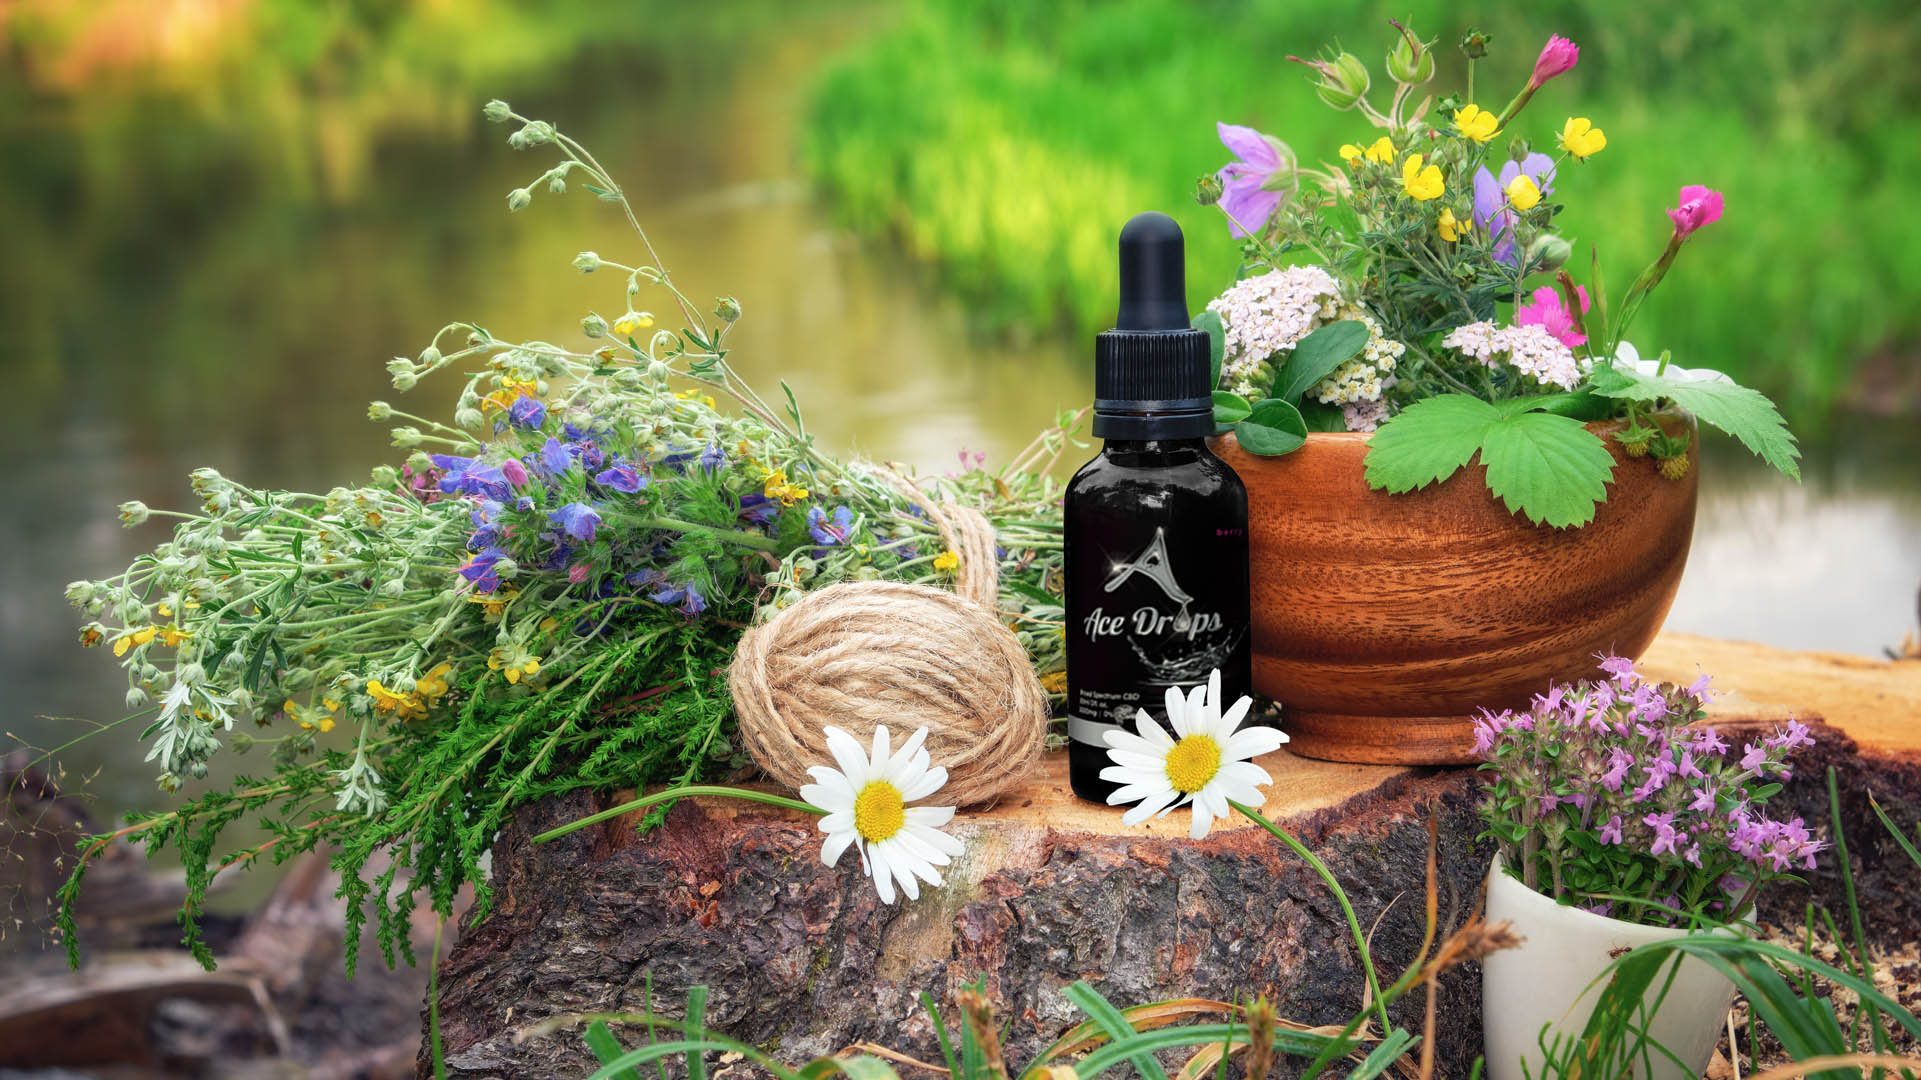 Ace Drops All Natural Premium CBD Broad Spectrum Berry Flavored Tincture Bottle 0% THC with Flowery Backdrop